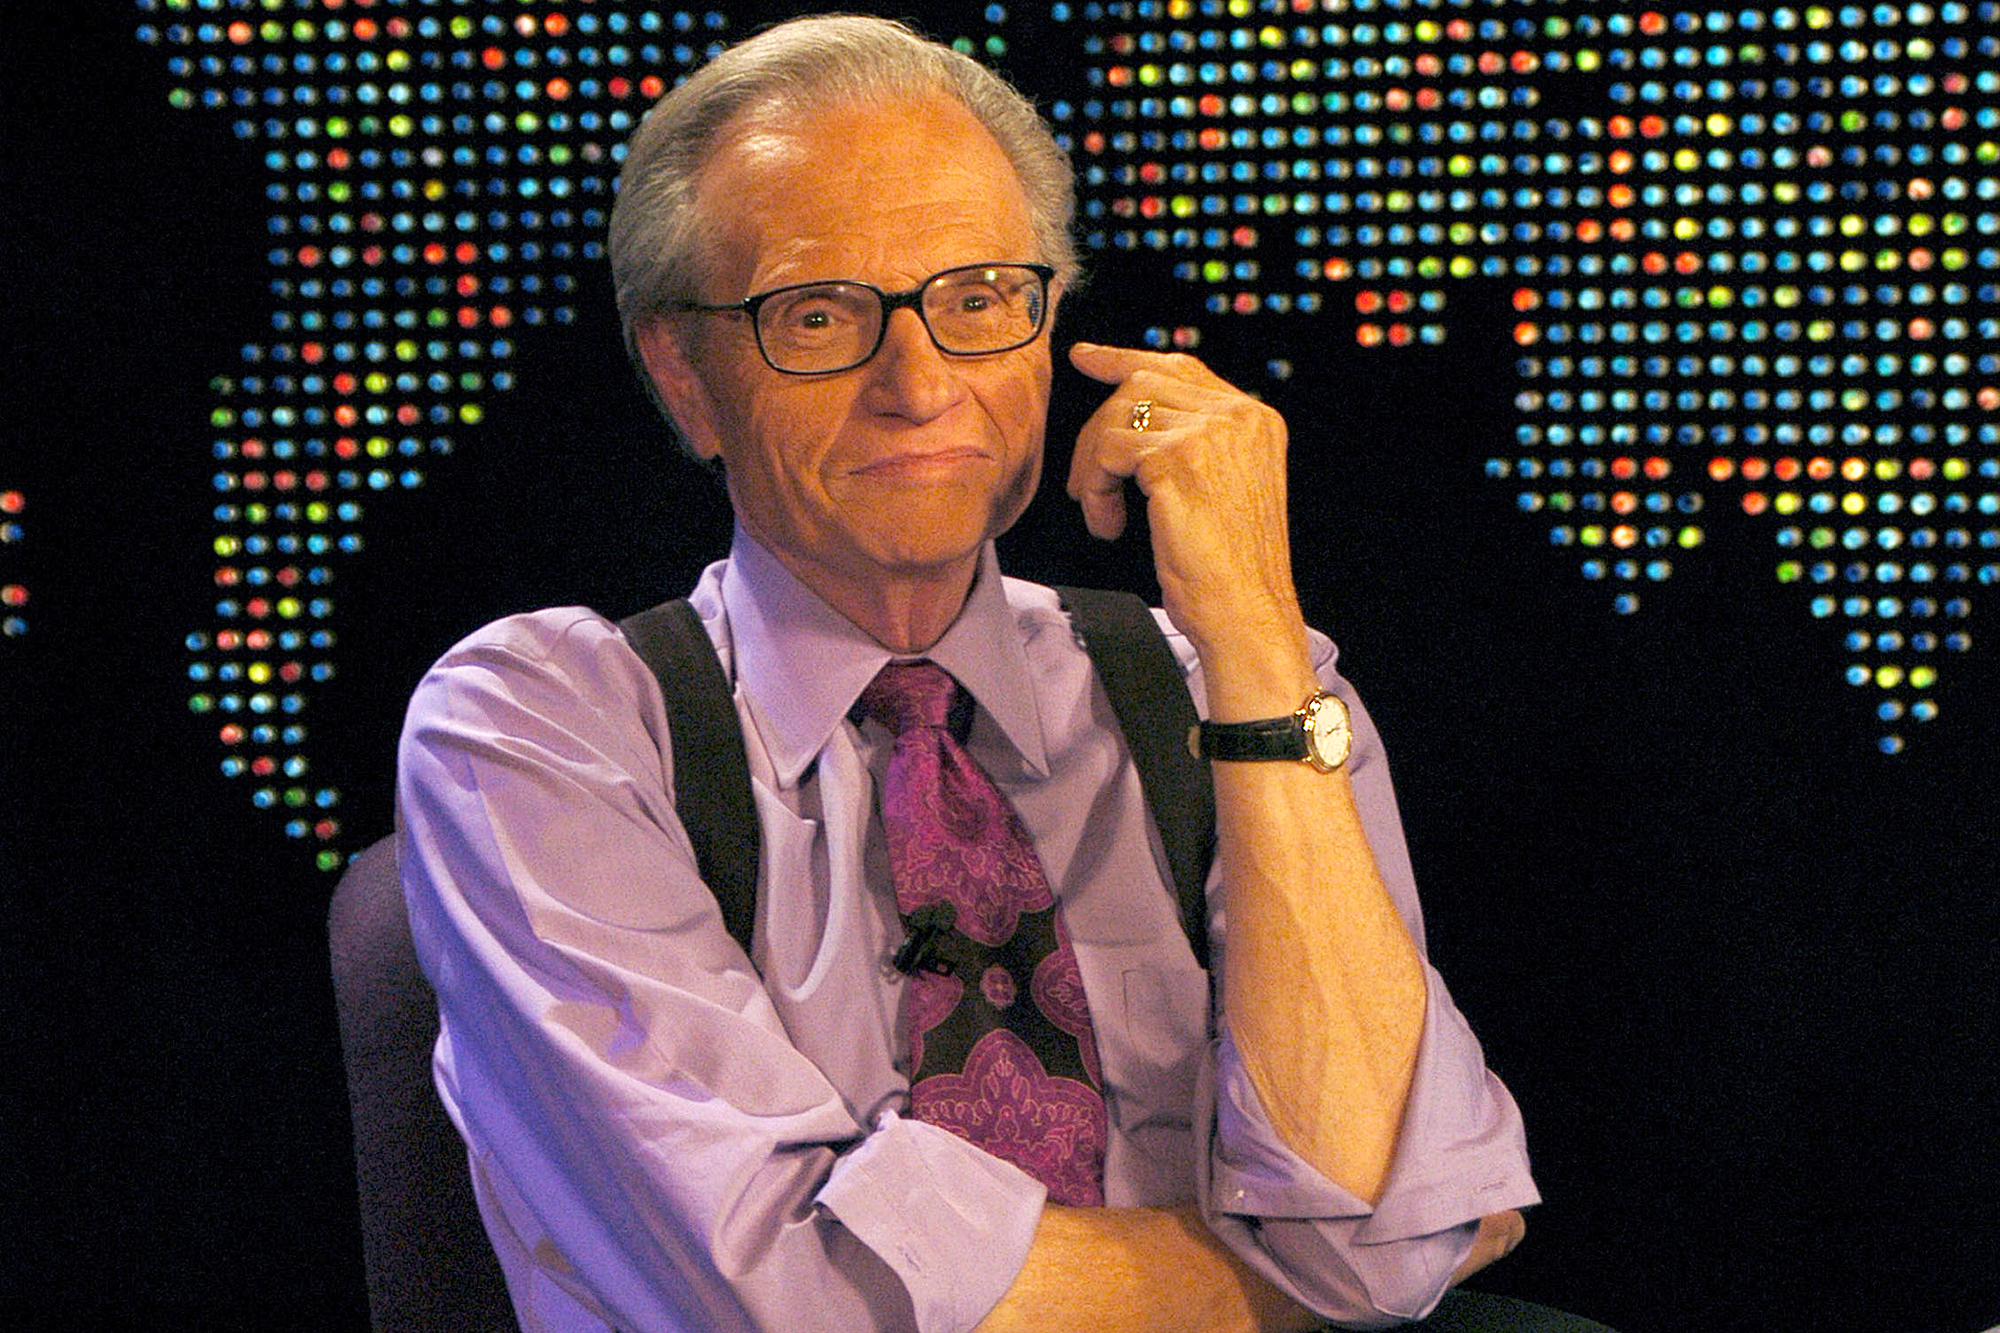 Larry King during Live Taping of 'The Larry King Show'